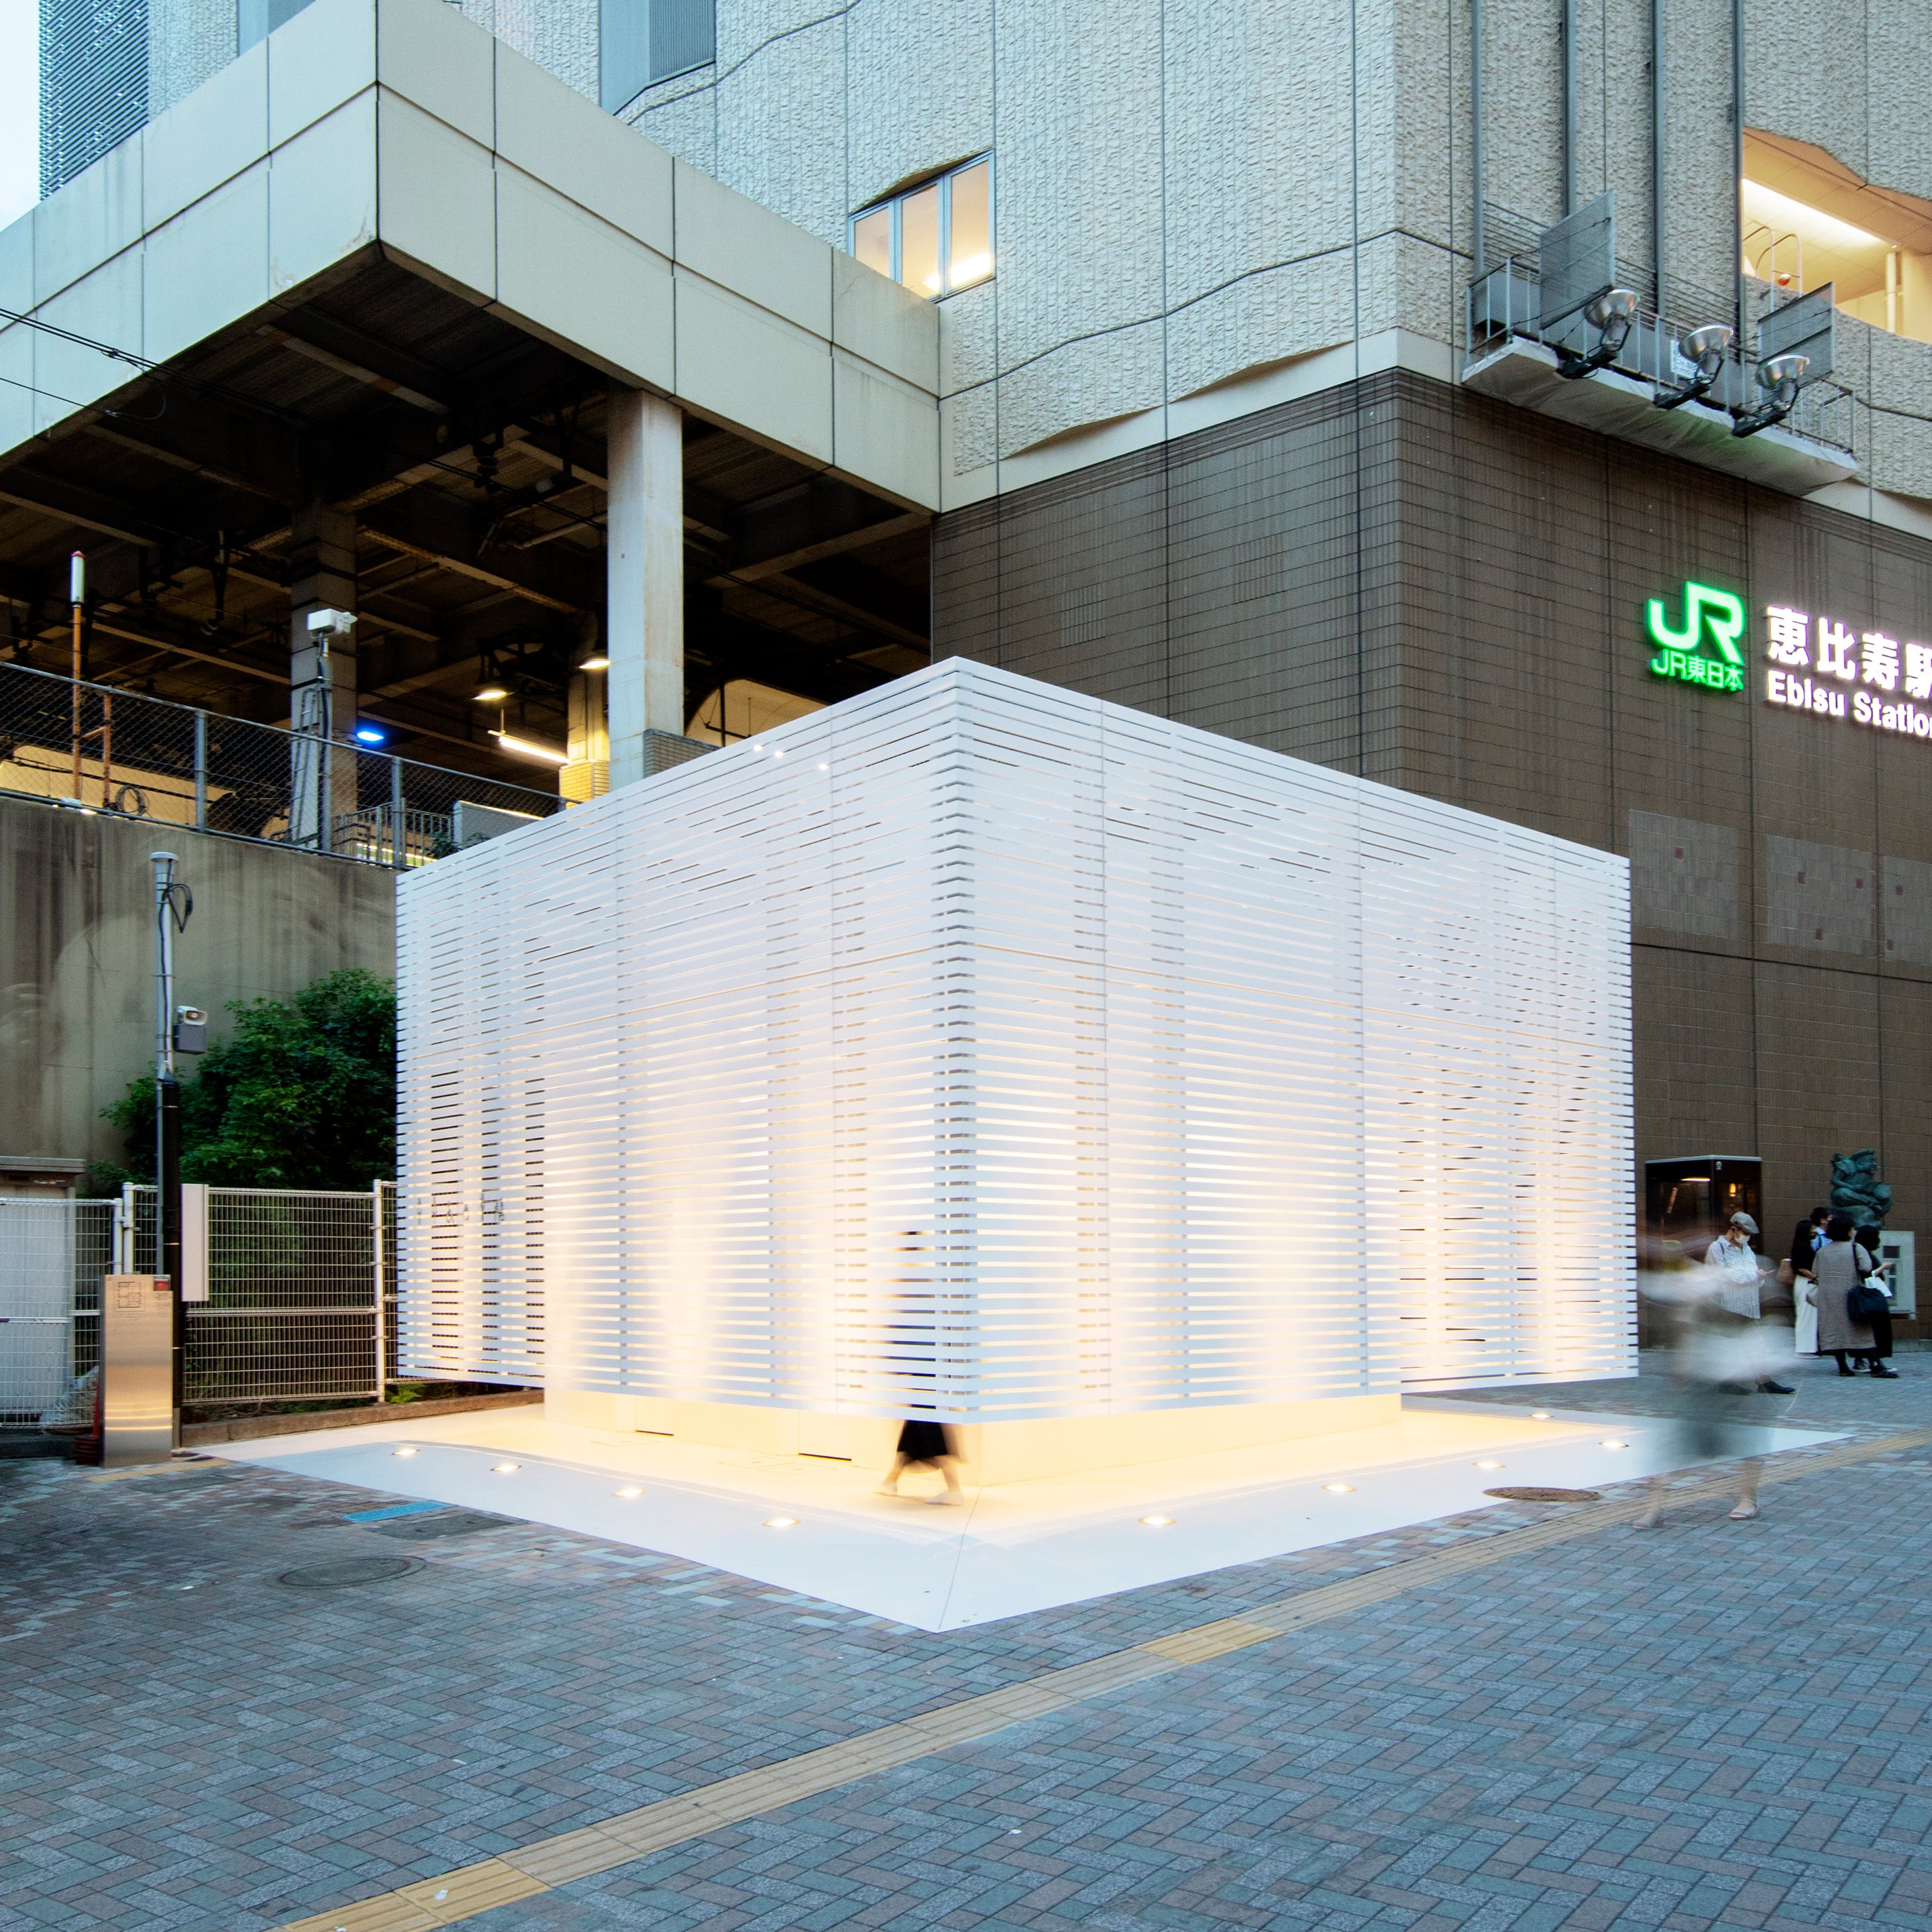 Far from Being Shabby and Unkempt, The Tokyo Toilets are a Breakthrough for Clean White Public Facilities